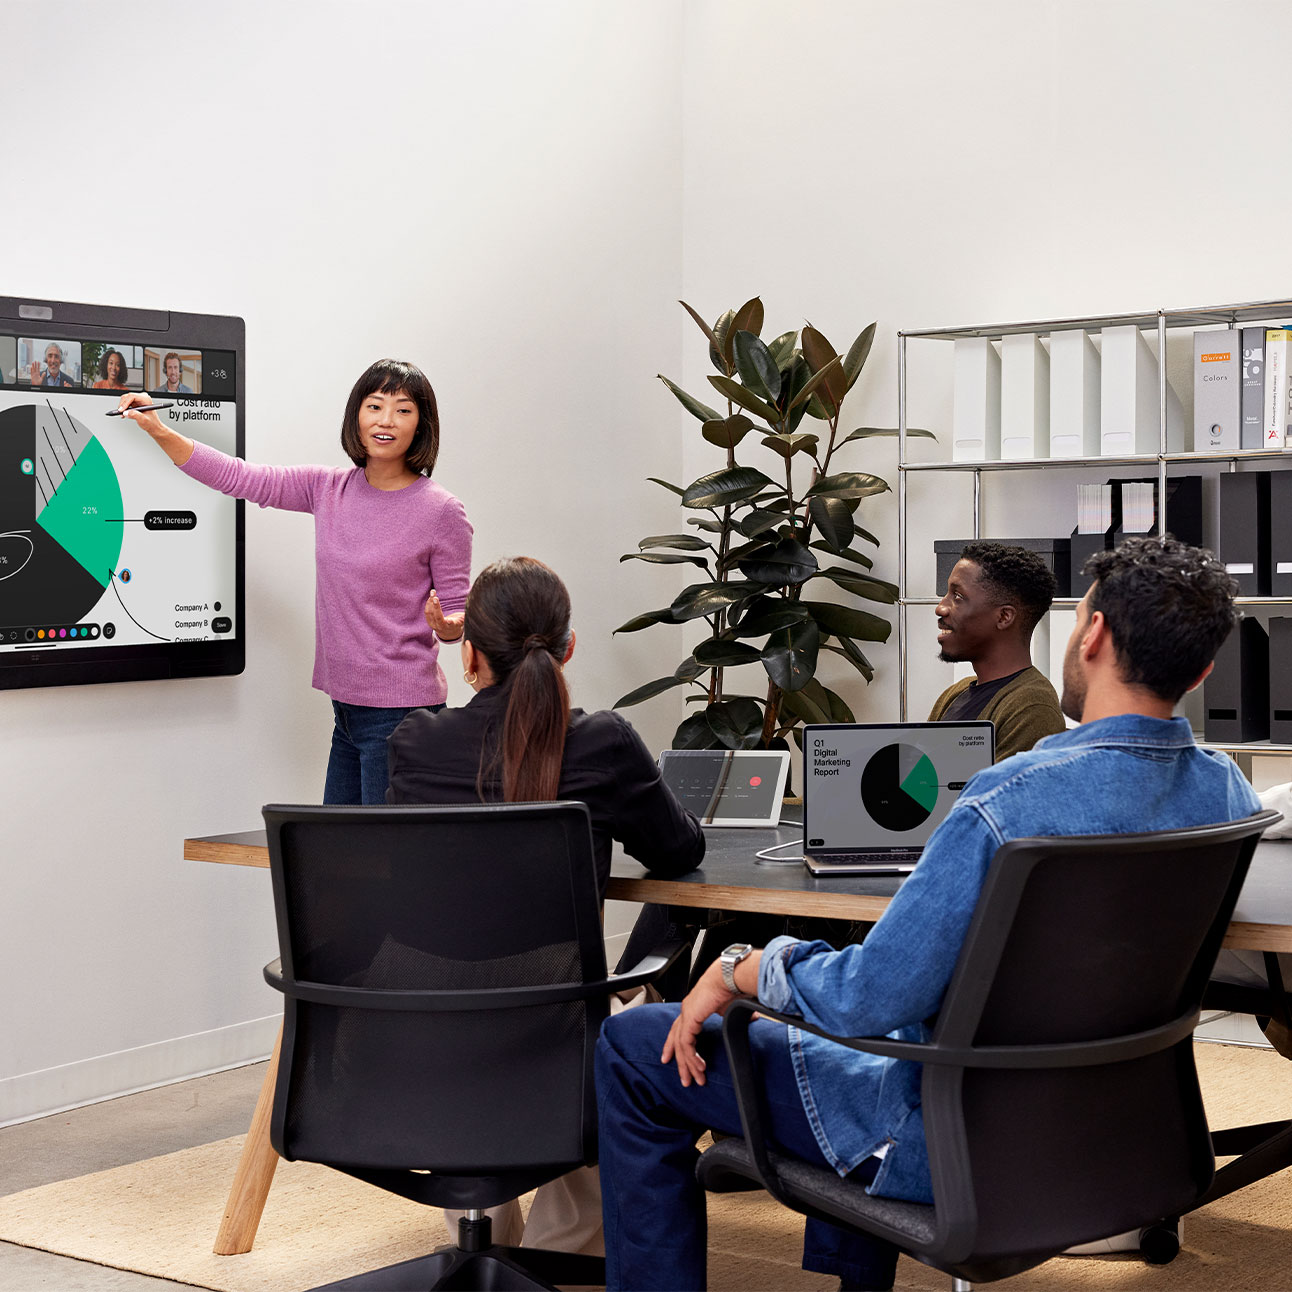 Professional gives presentation on Cisco Board Pro to coworkers in a small conference room.